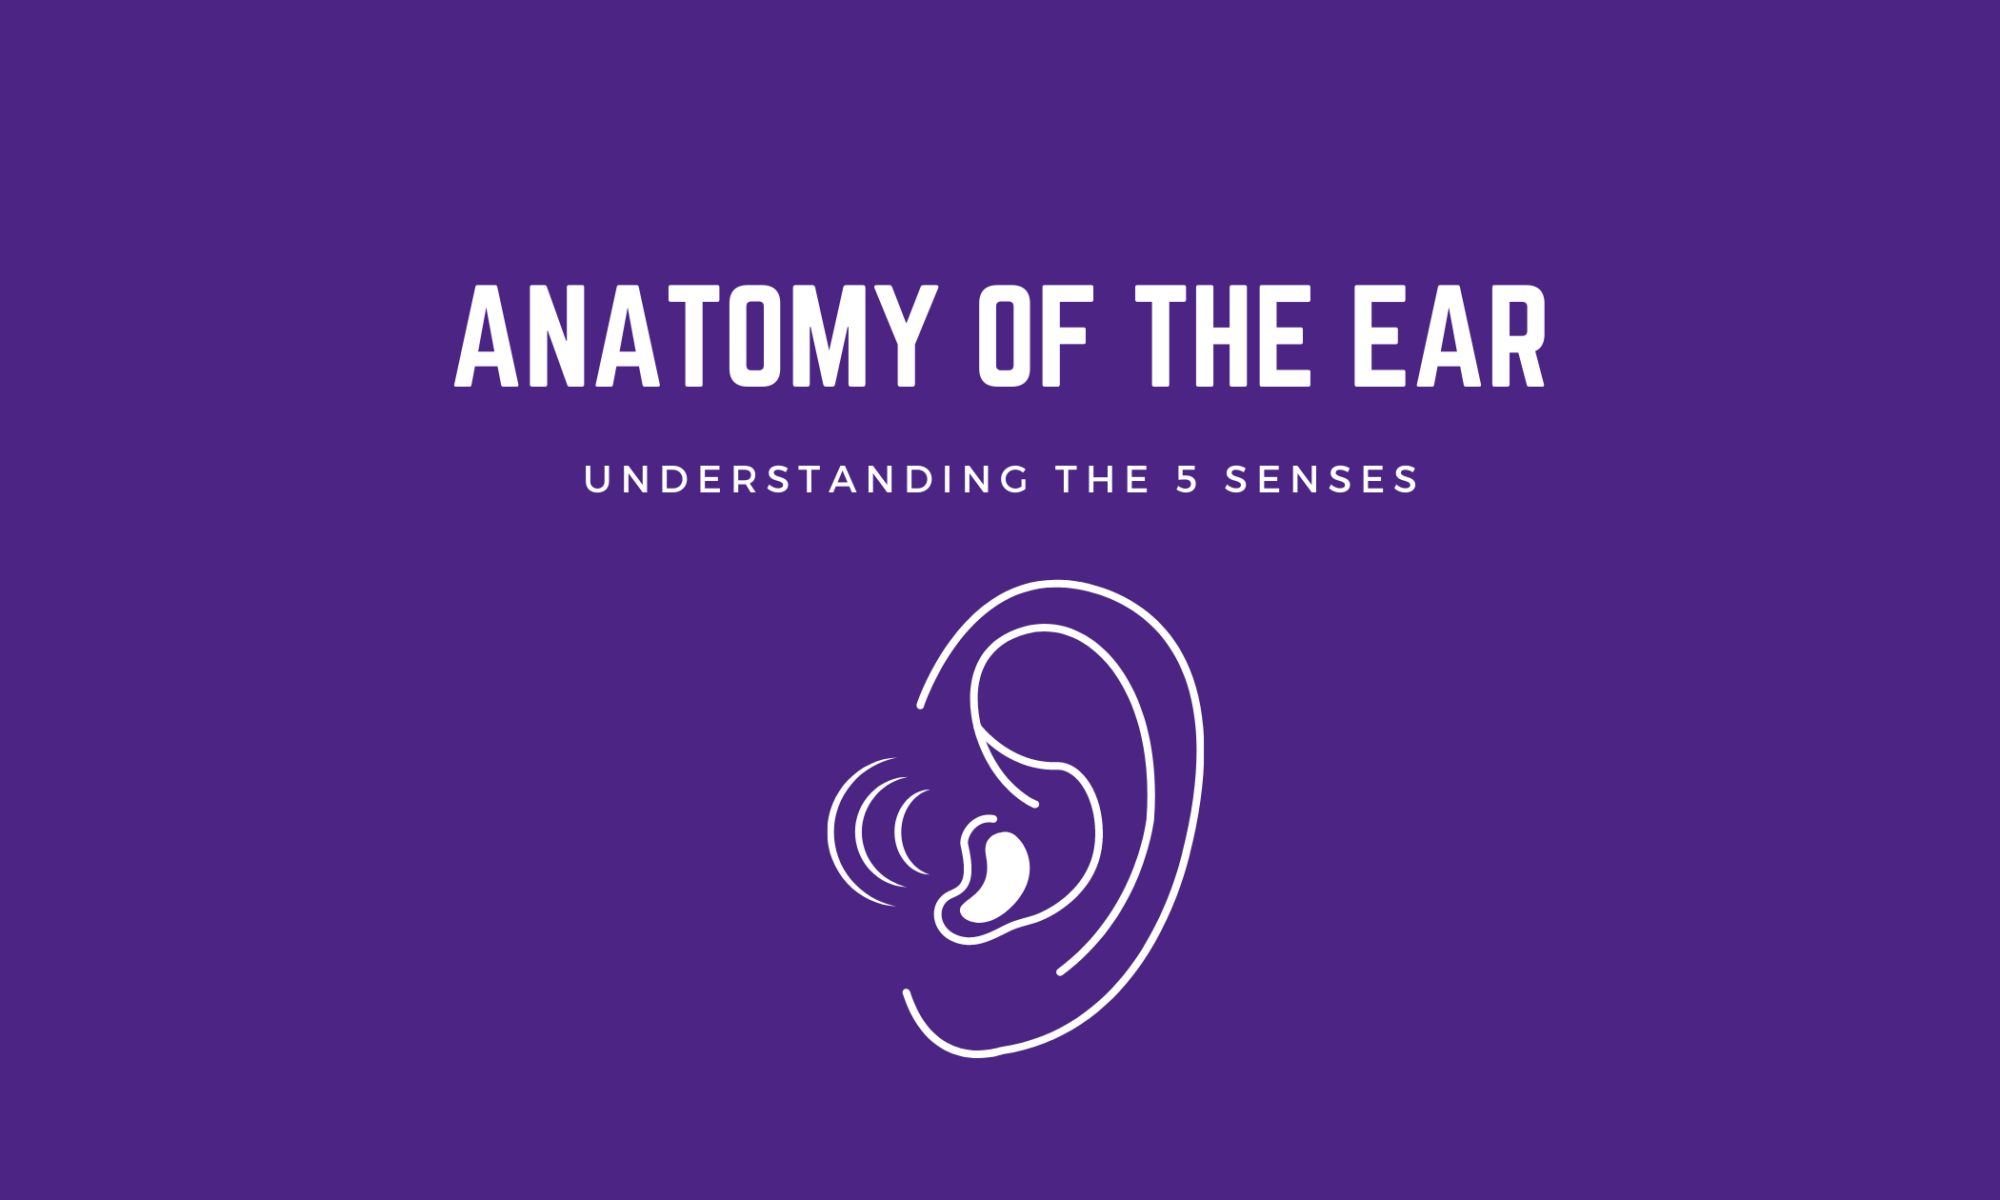 anatomy of the ear understanding the 5 senses in white text above an outline of an ear on a dark purple background